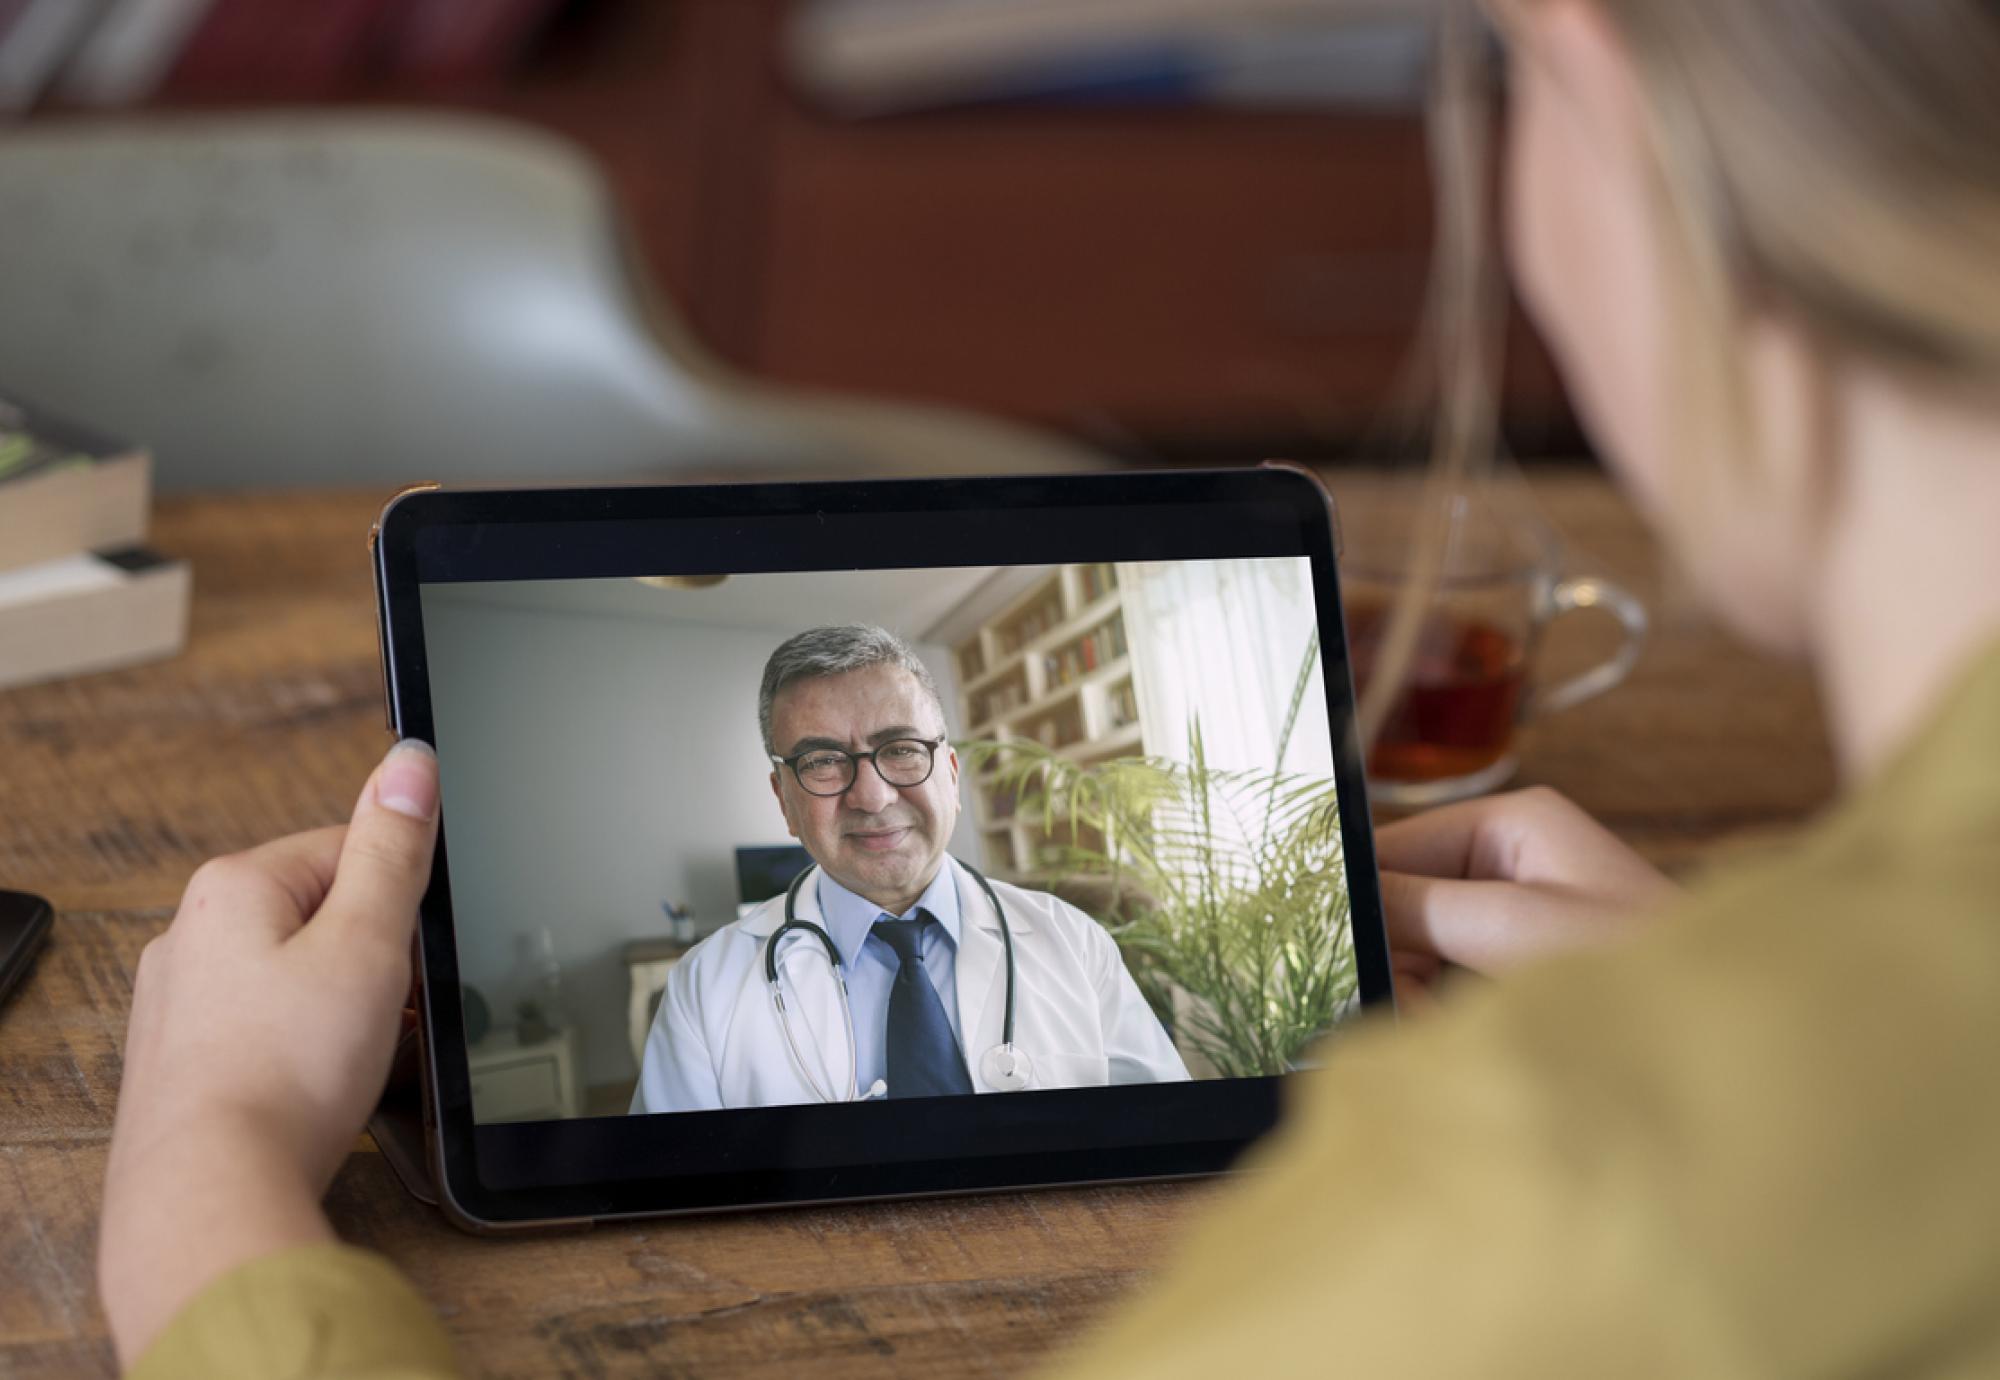 Doctor and patient talking on video call using digital tablet